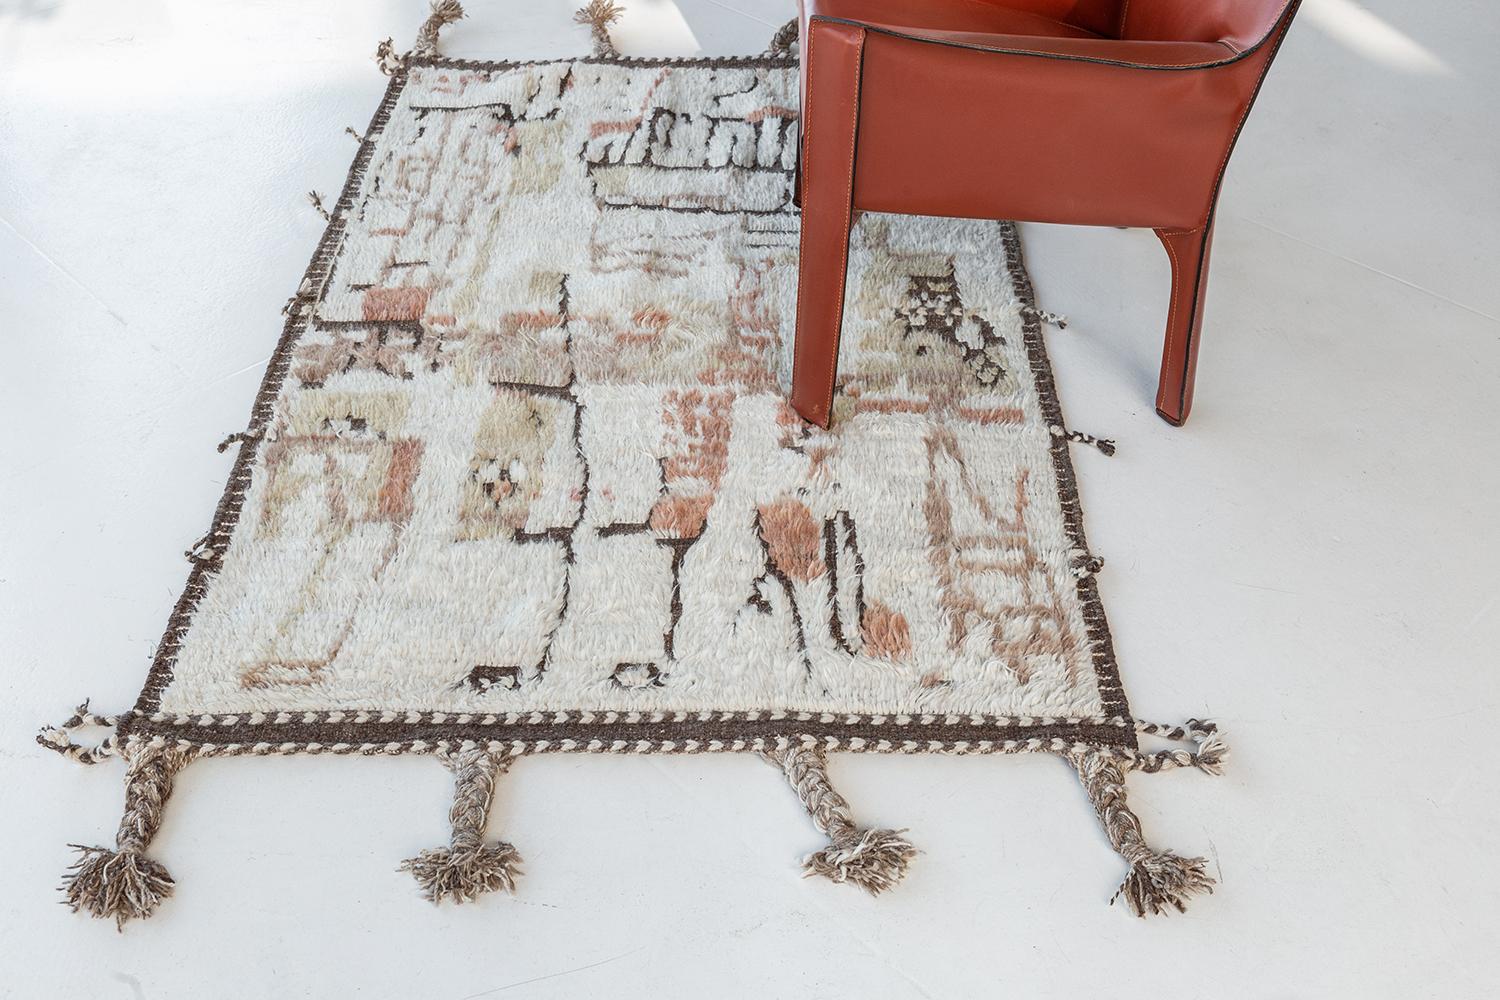 Meliska is a captivating textured rug with irregular motifs inspired by the Atlas Mountains of Morocco. Earthy tones of ivory, cream, and chocolate brown surrounded by umber brown shag work cohesively to make for a great contemporary interpretation